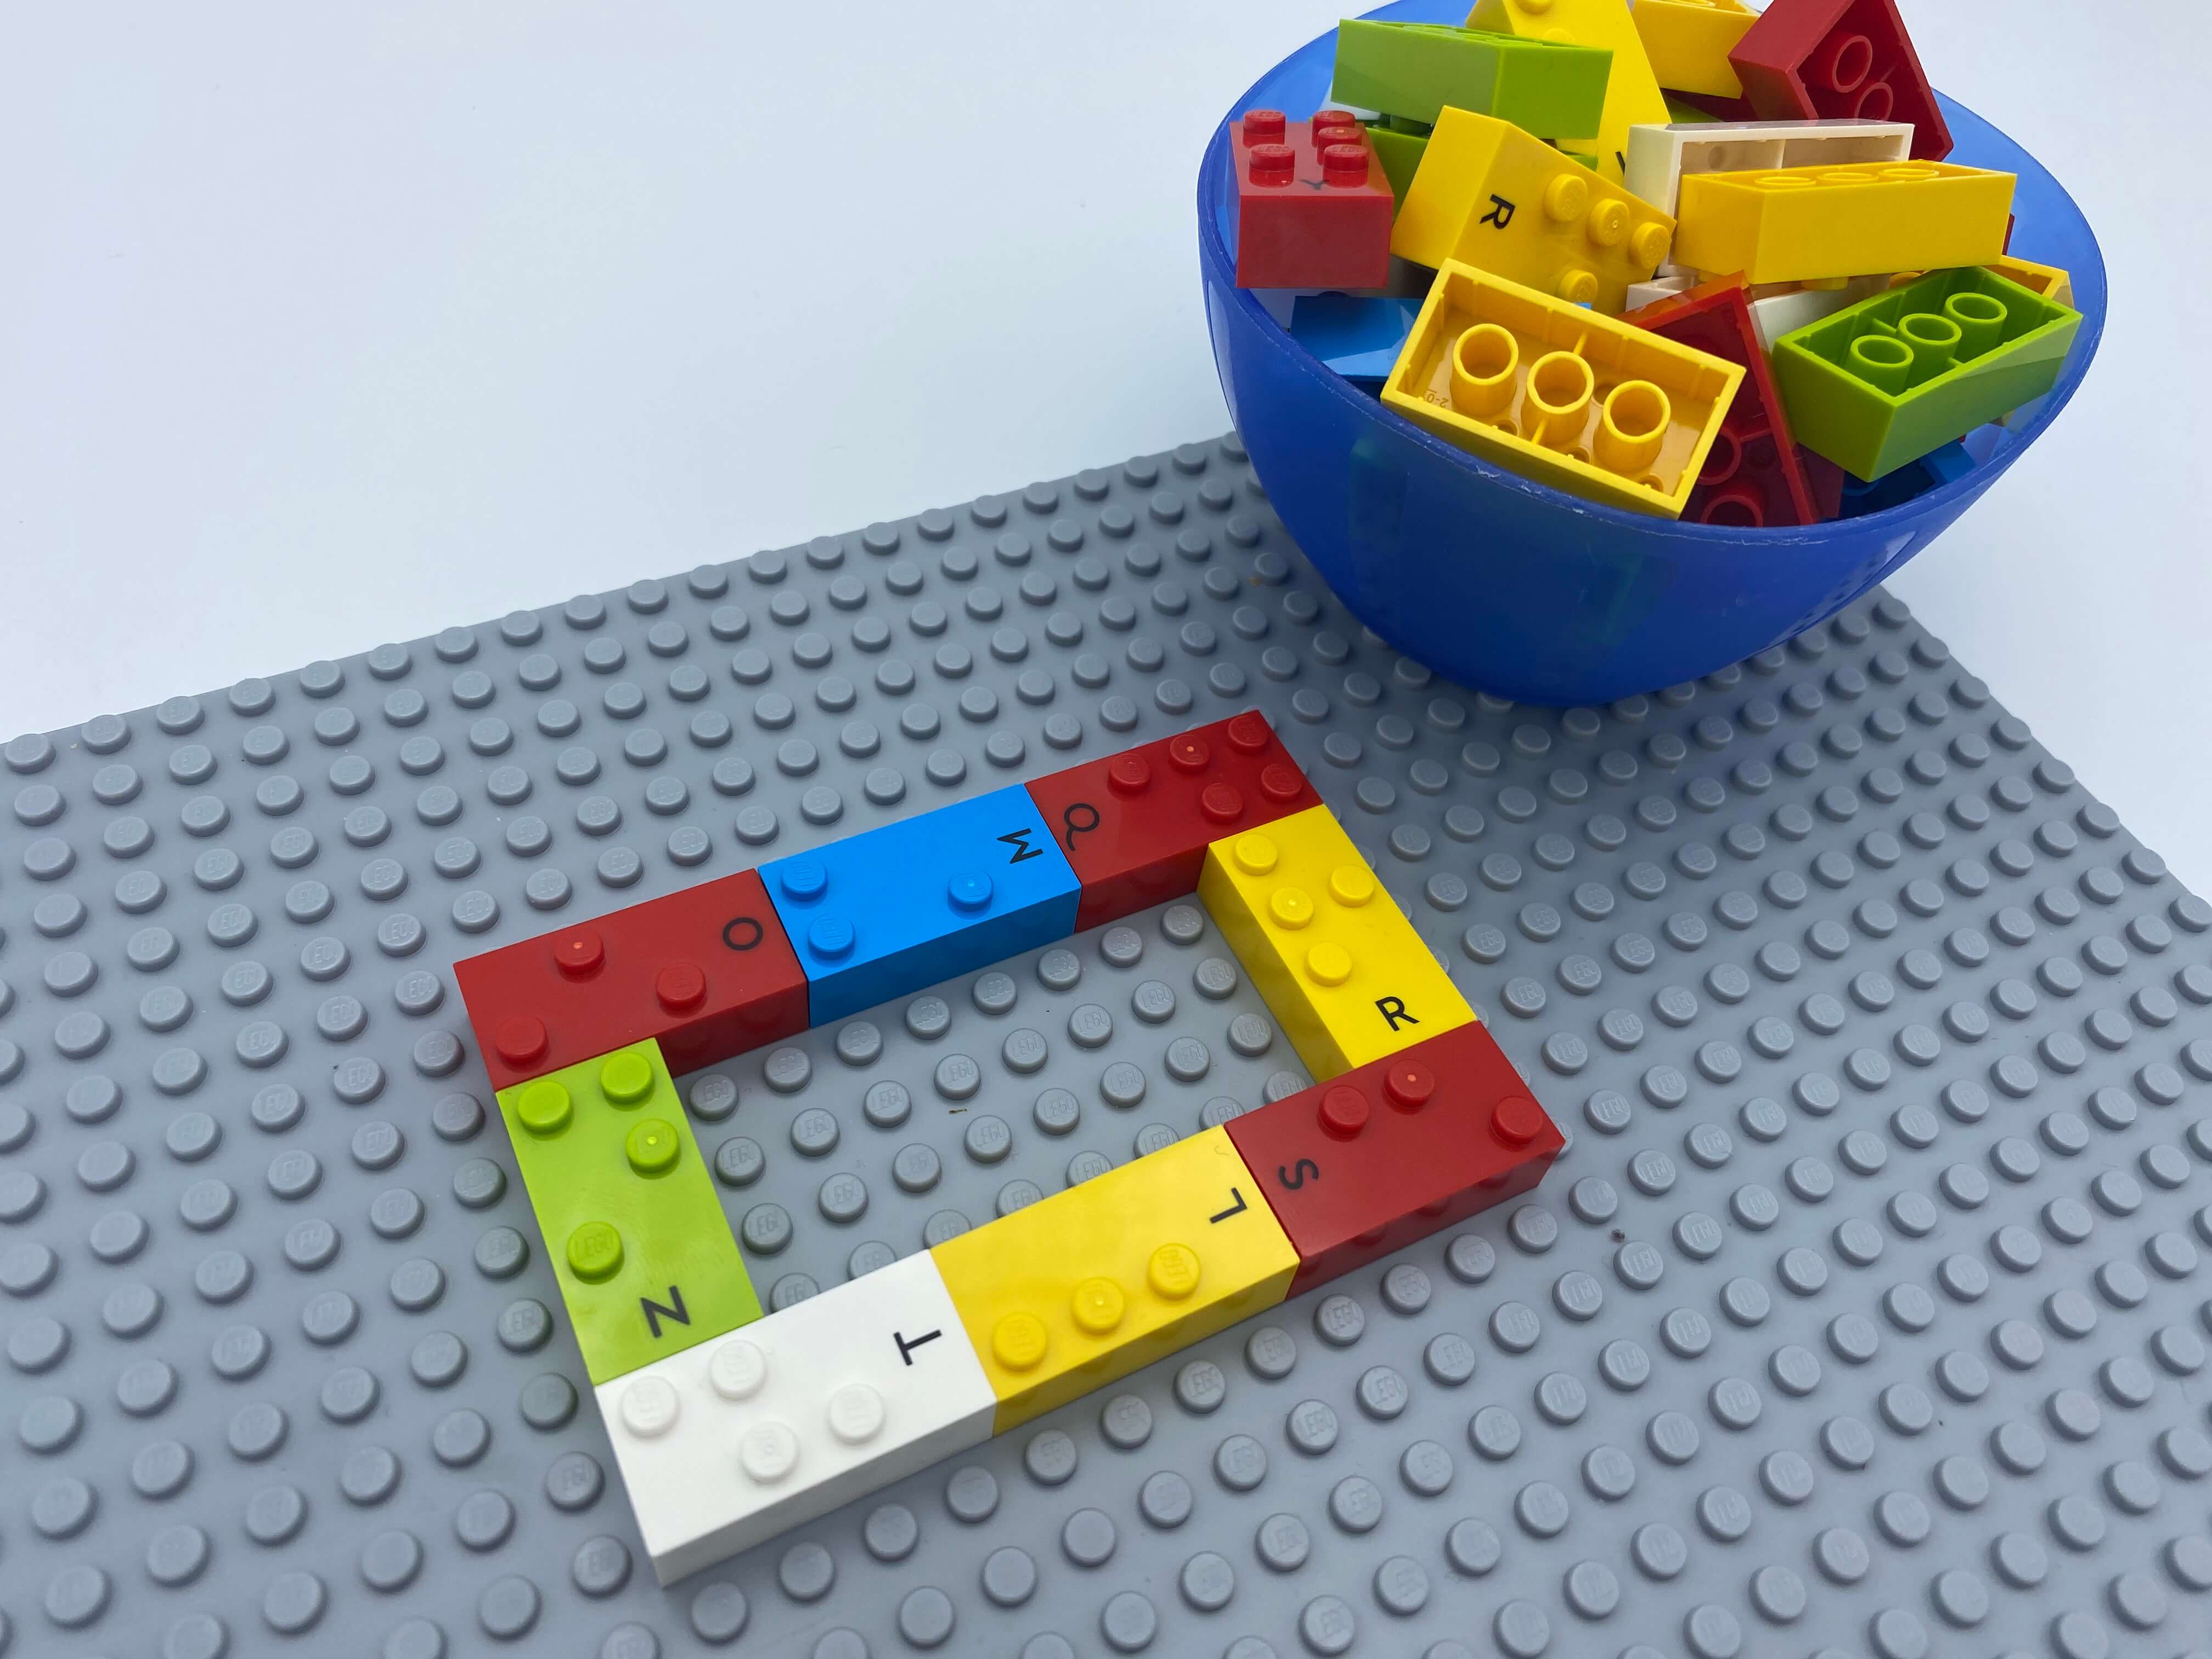 A rectangle of 8 bricks on the base plate, 40 bricks in a bowl.